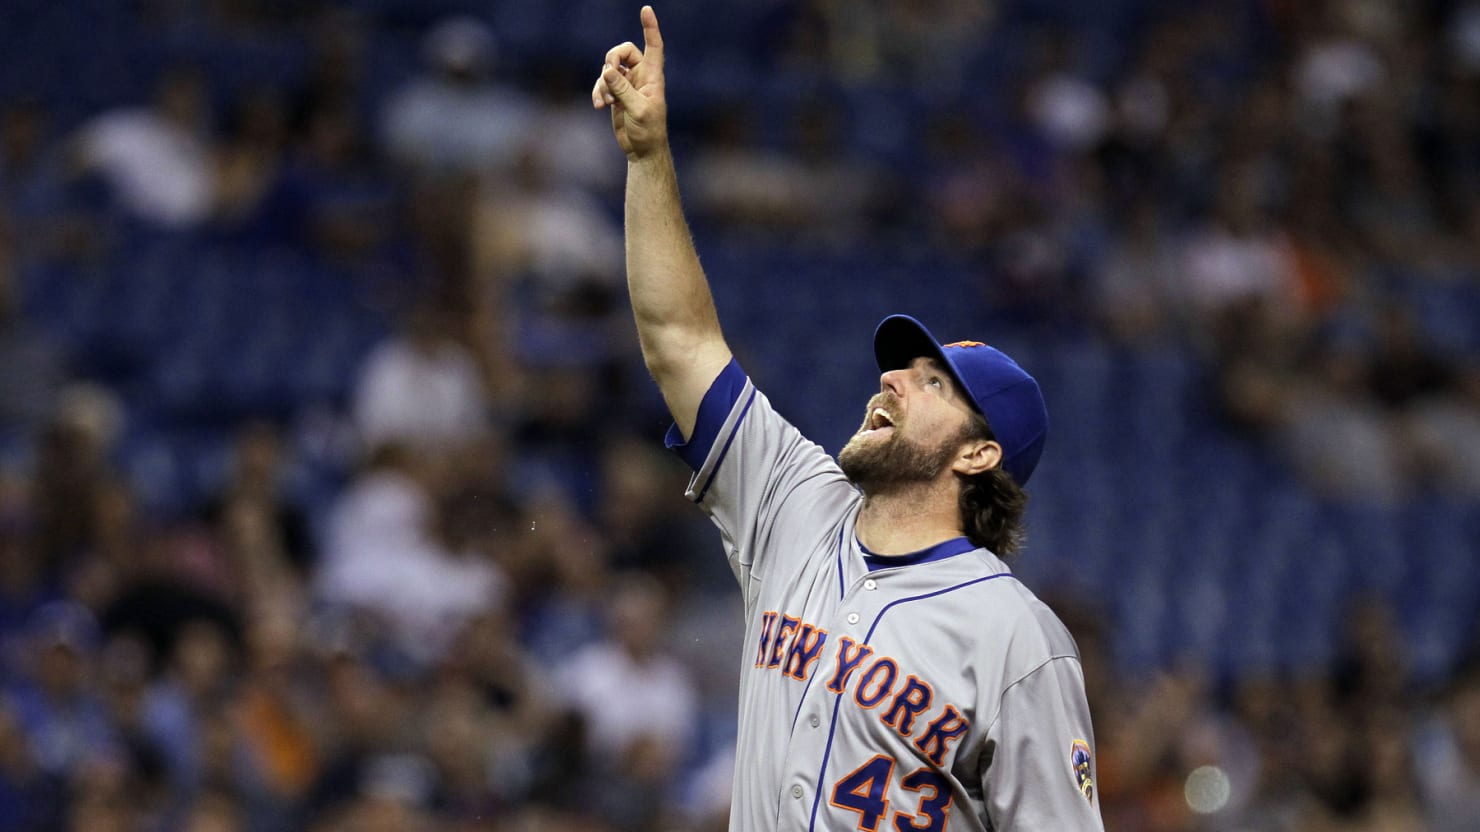 The Mets' R.A. Dickey's Miracle Season